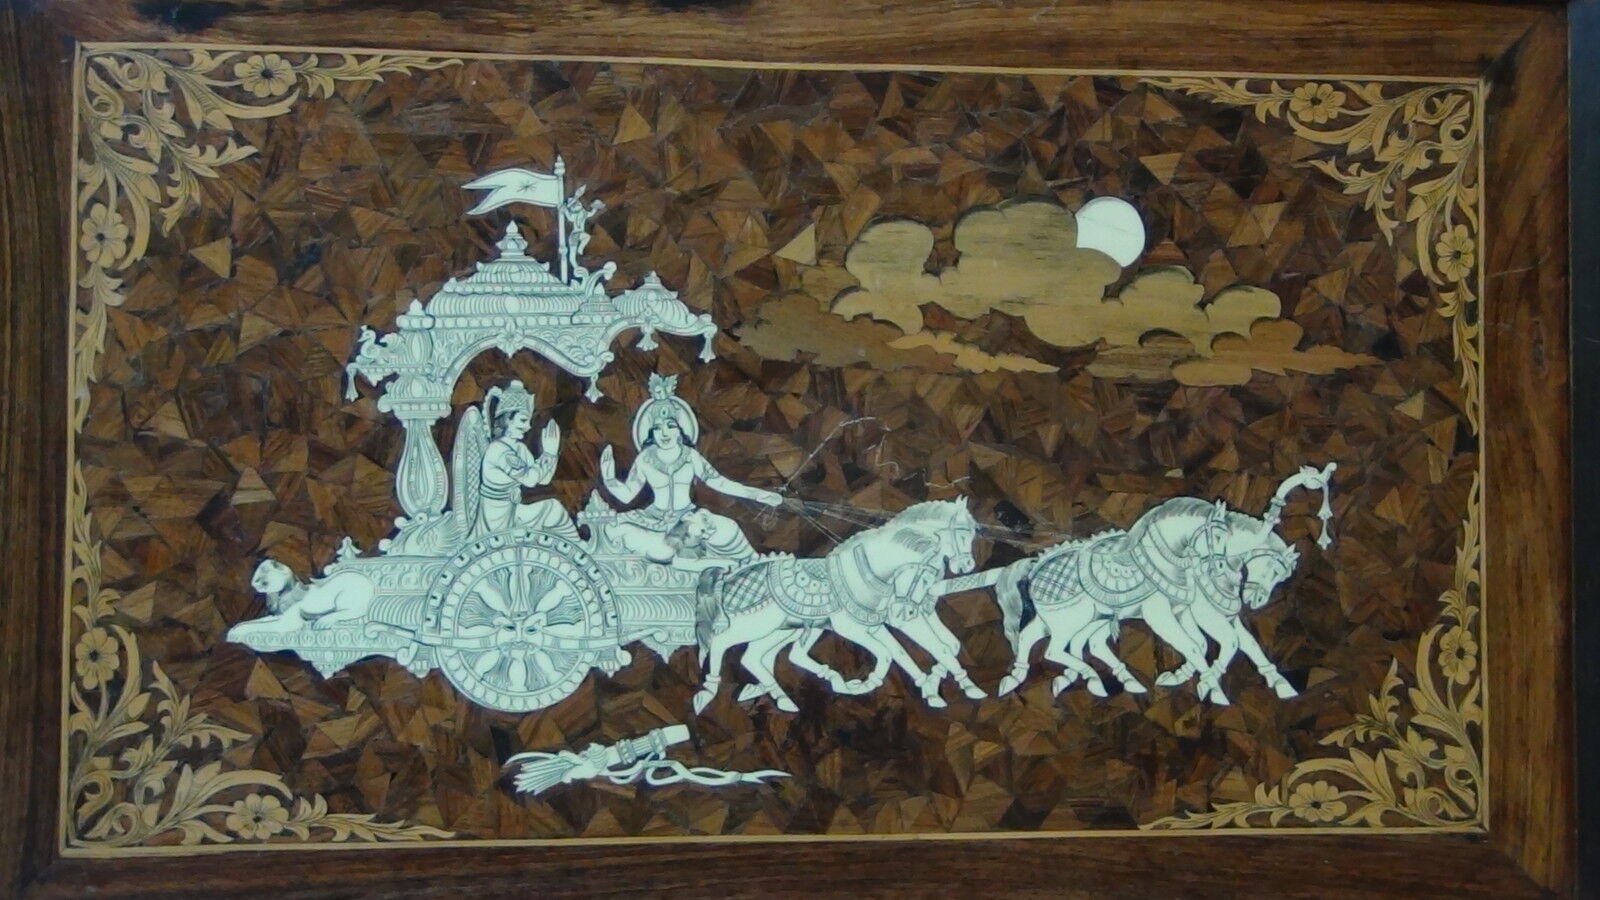 ANTIQUE 19c SOUTHEAST ASIA WOOD INLAID WALL PLAQUE WITH GODDESS ON CHARIOT 